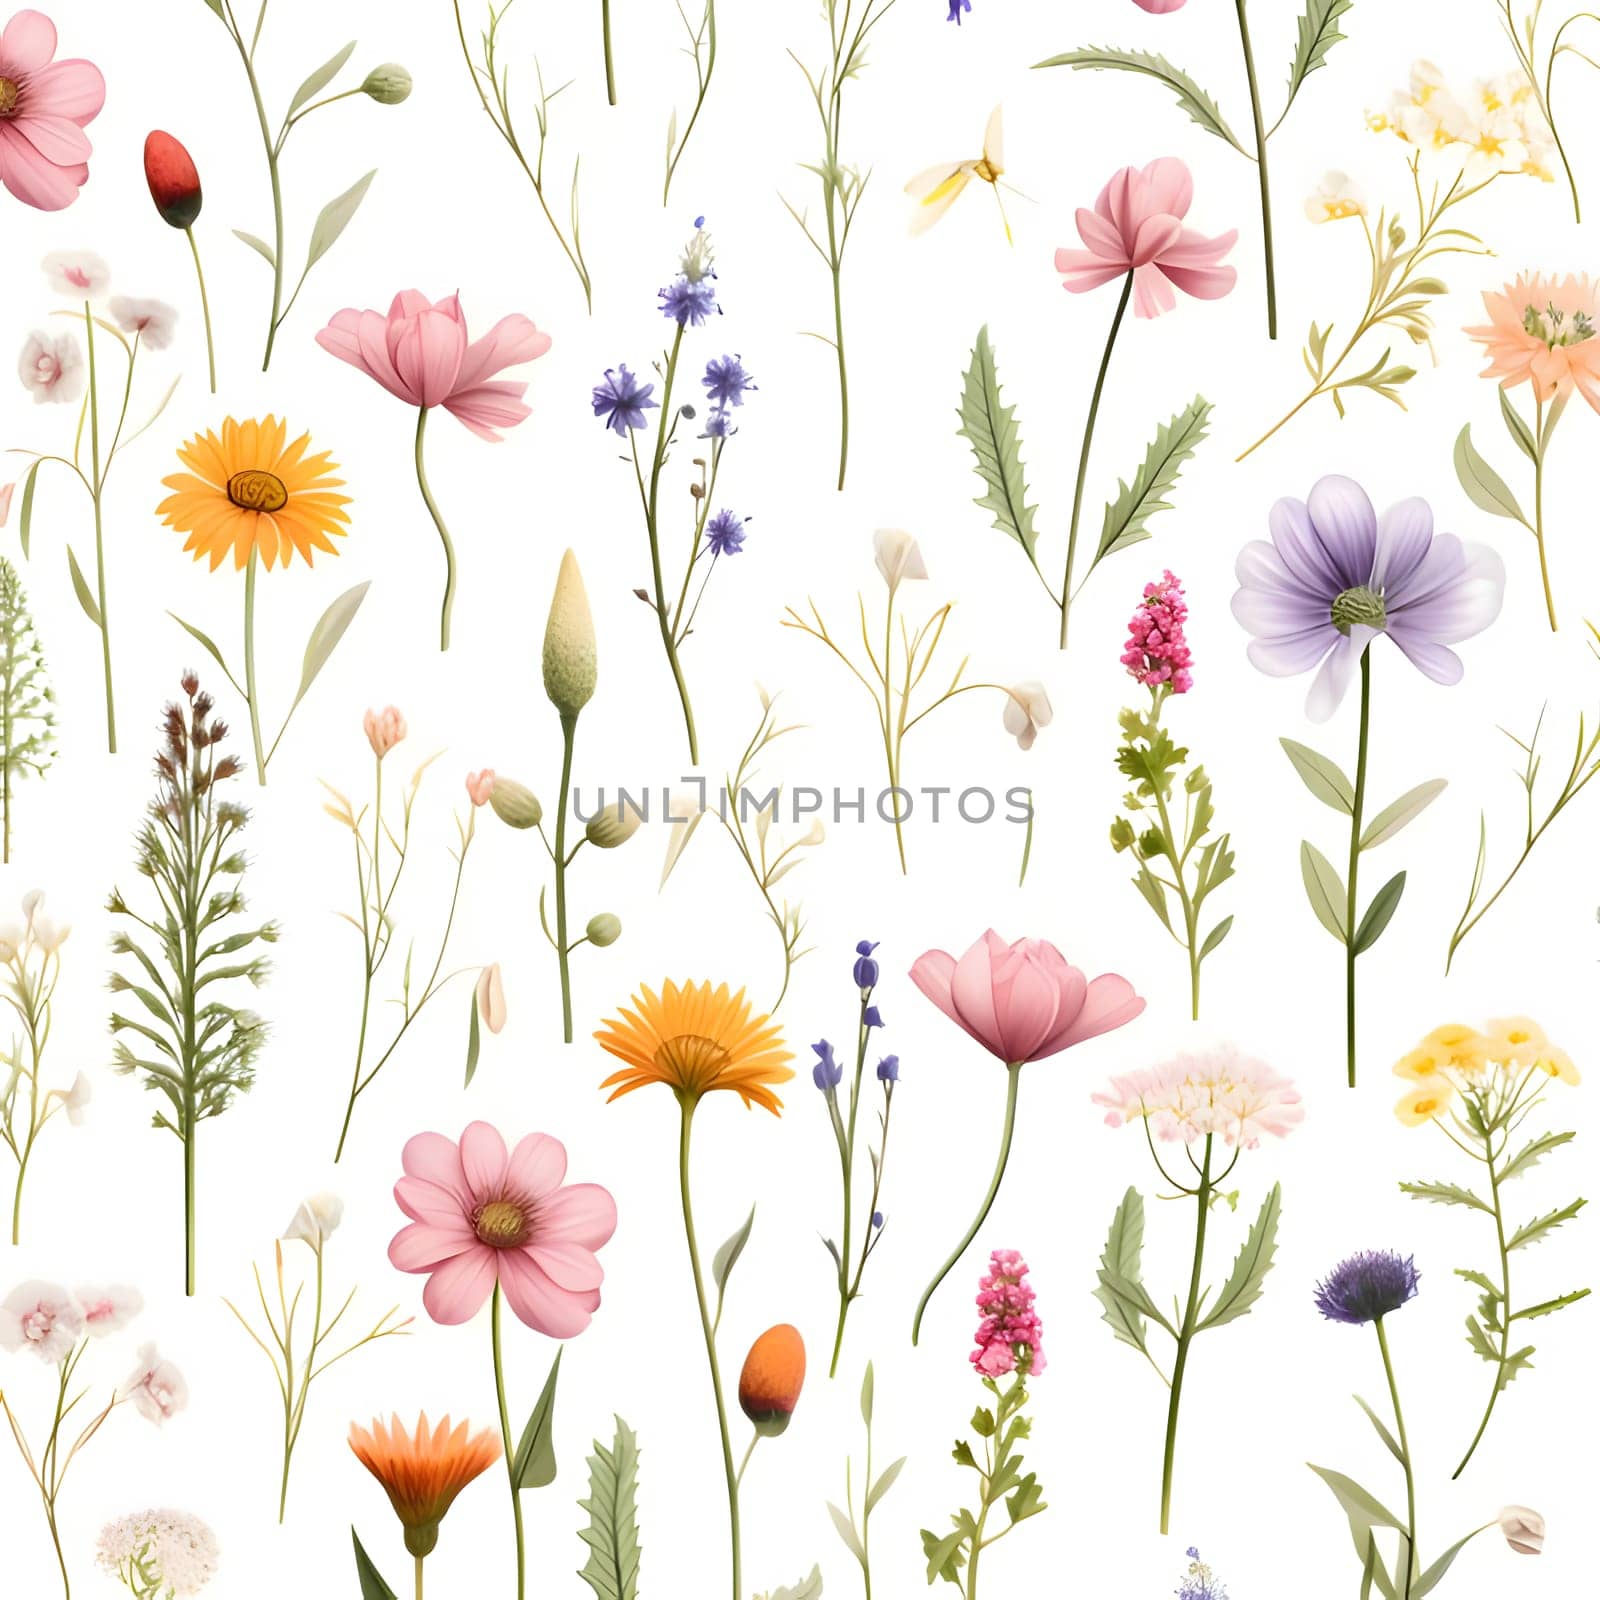 Patterns and banners backgrounds: Seamless pattern with wildflowers on a white background.